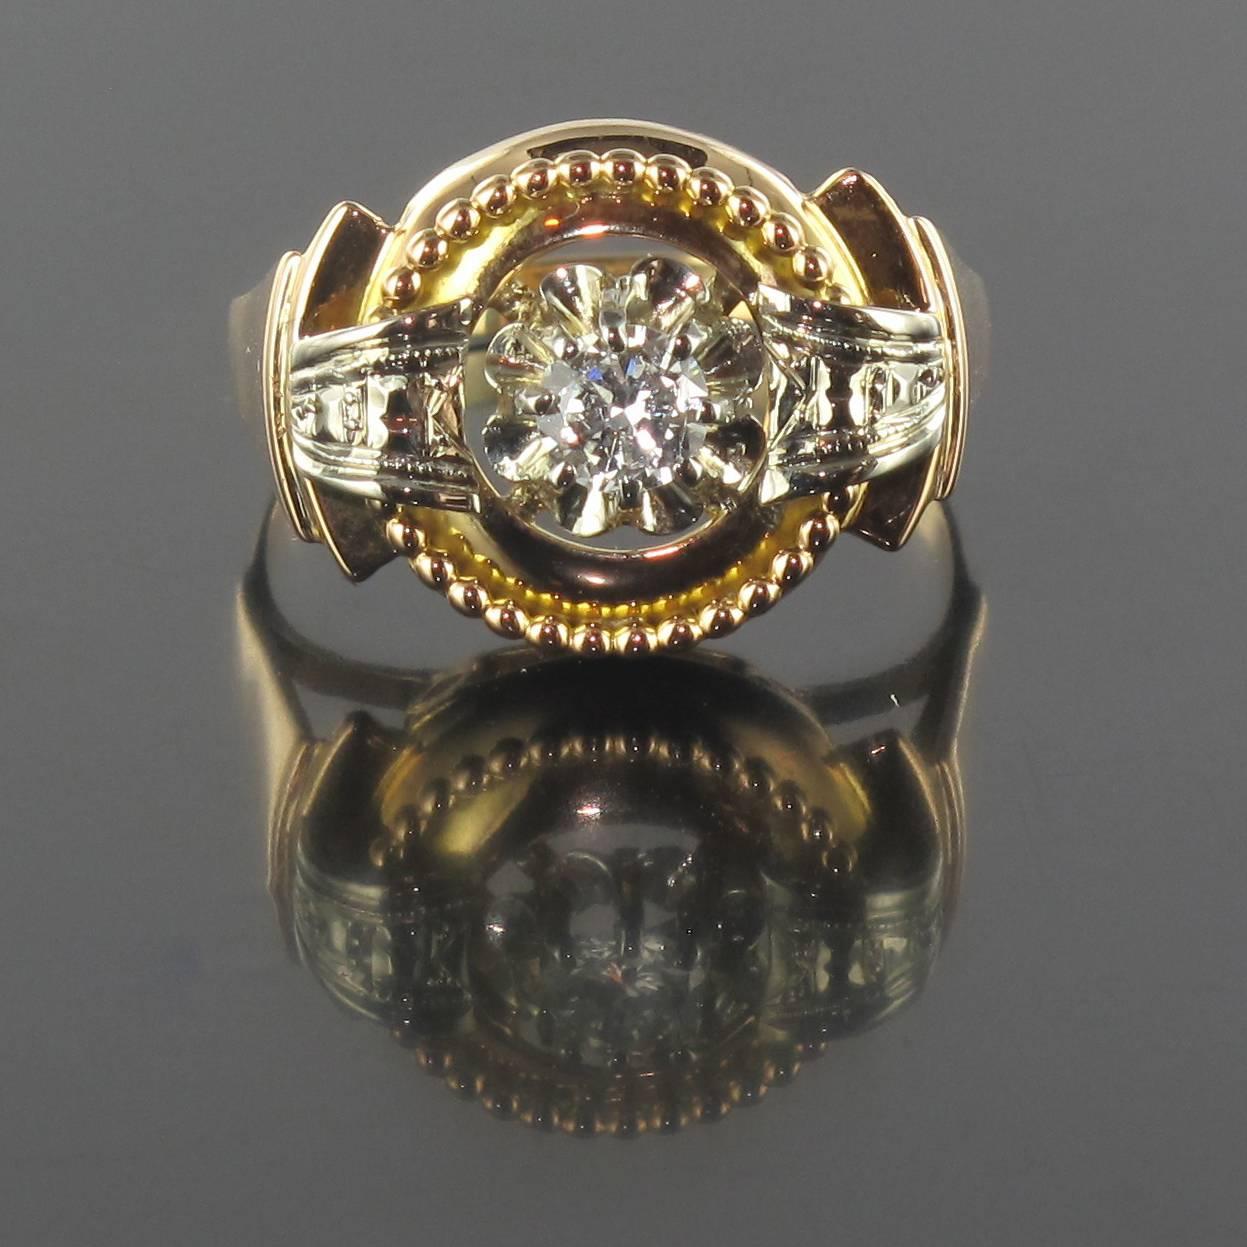 Ring in 18 carat yellow and white gold, eagle head hallmark. 

This antique ring is set with a brilliant cut modern diamond on a round plate edged with a golden cord. The diamond features a chiselled white gold motif on each side. 

Weight of the